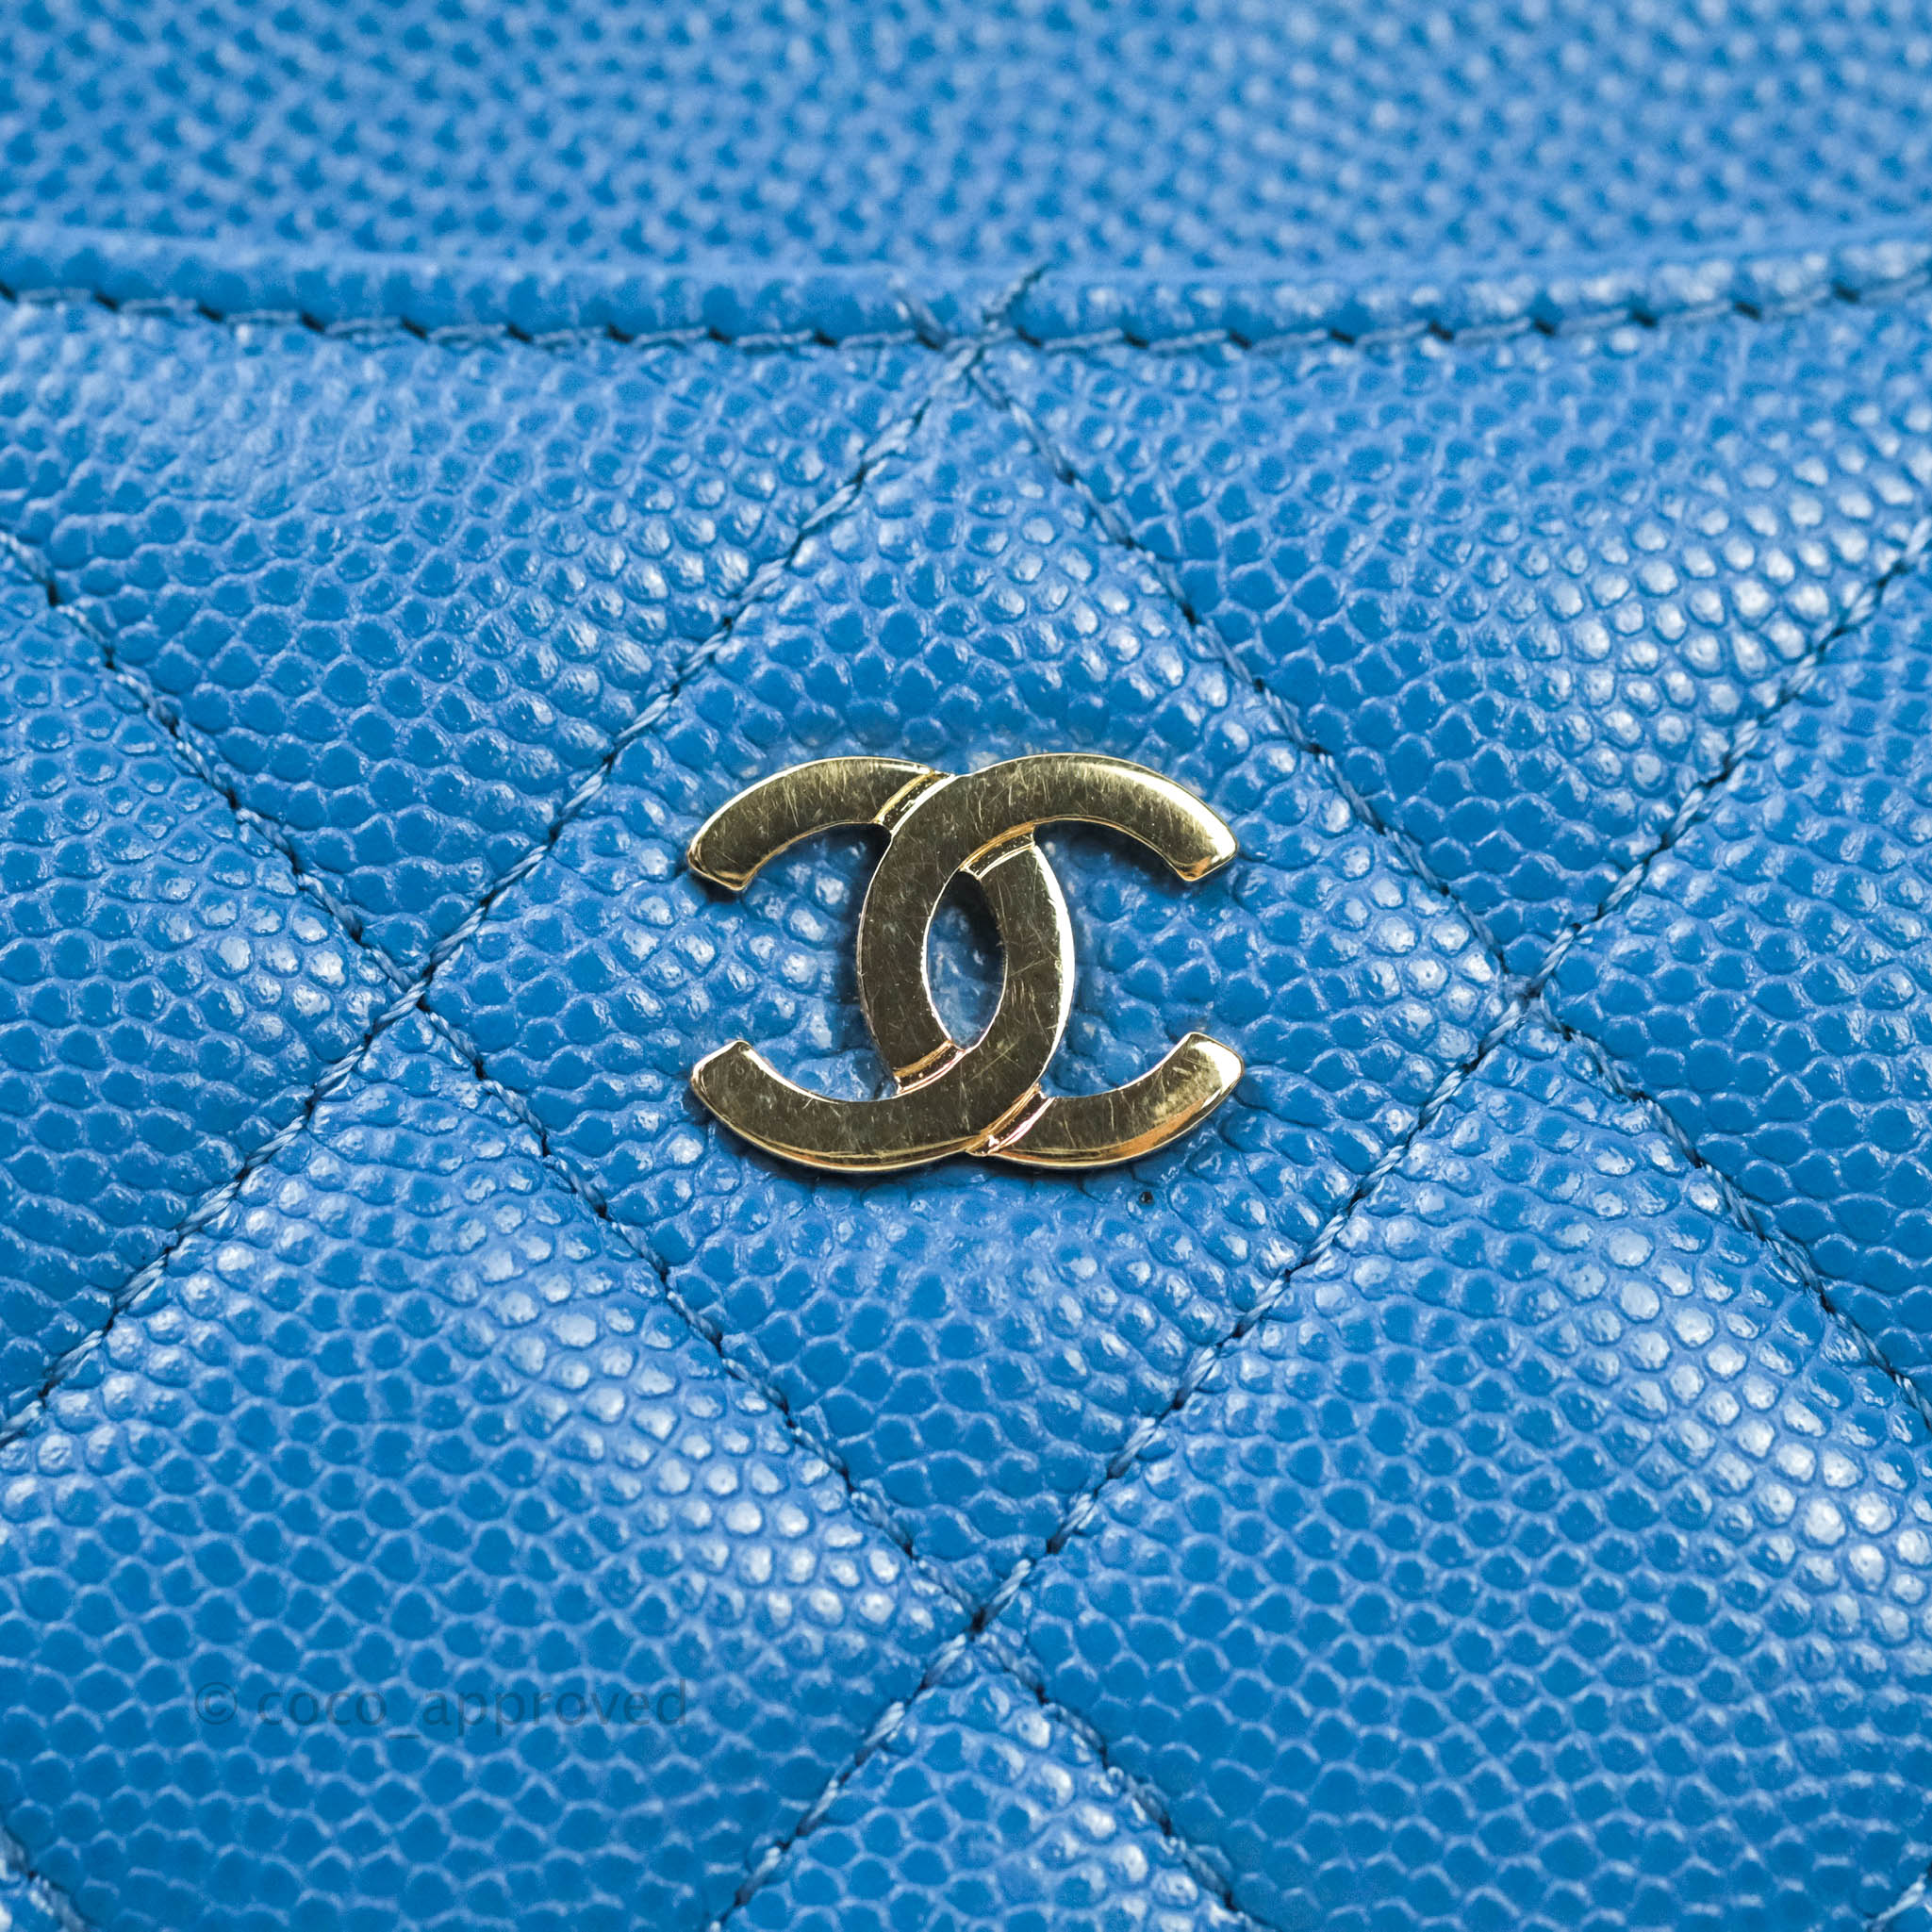 Chanel Classic Caviar Flat Card Holder Blue Gold Hardware – Coco Approved  Studio